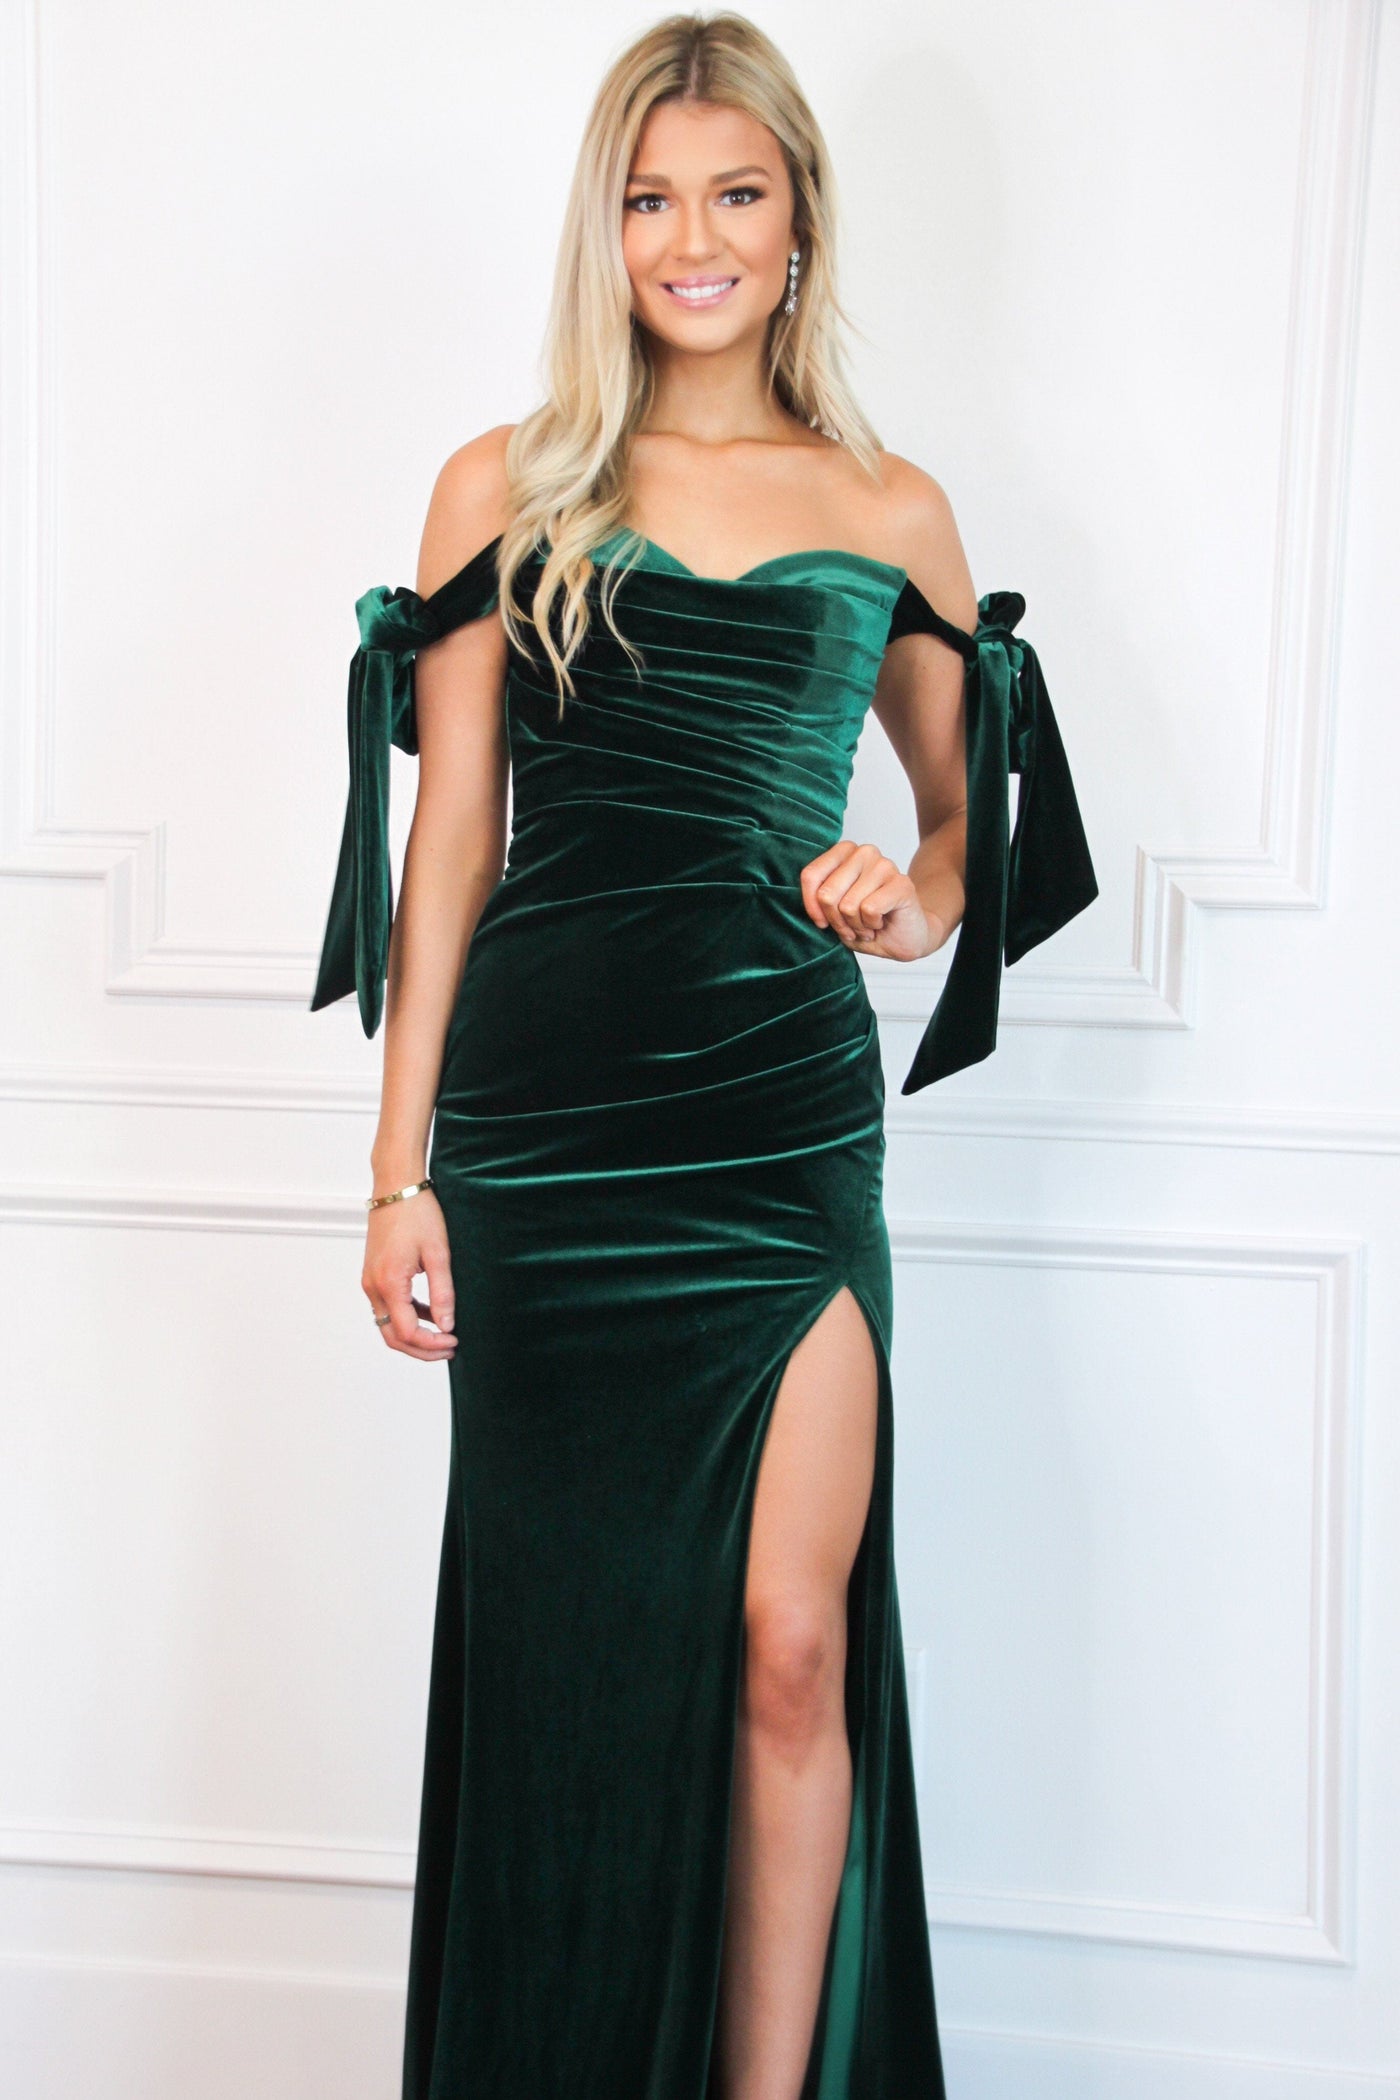 Southern Class Bow Sleeve Formal Dress: Emerald Velvet - Bella and Bloom Boutique